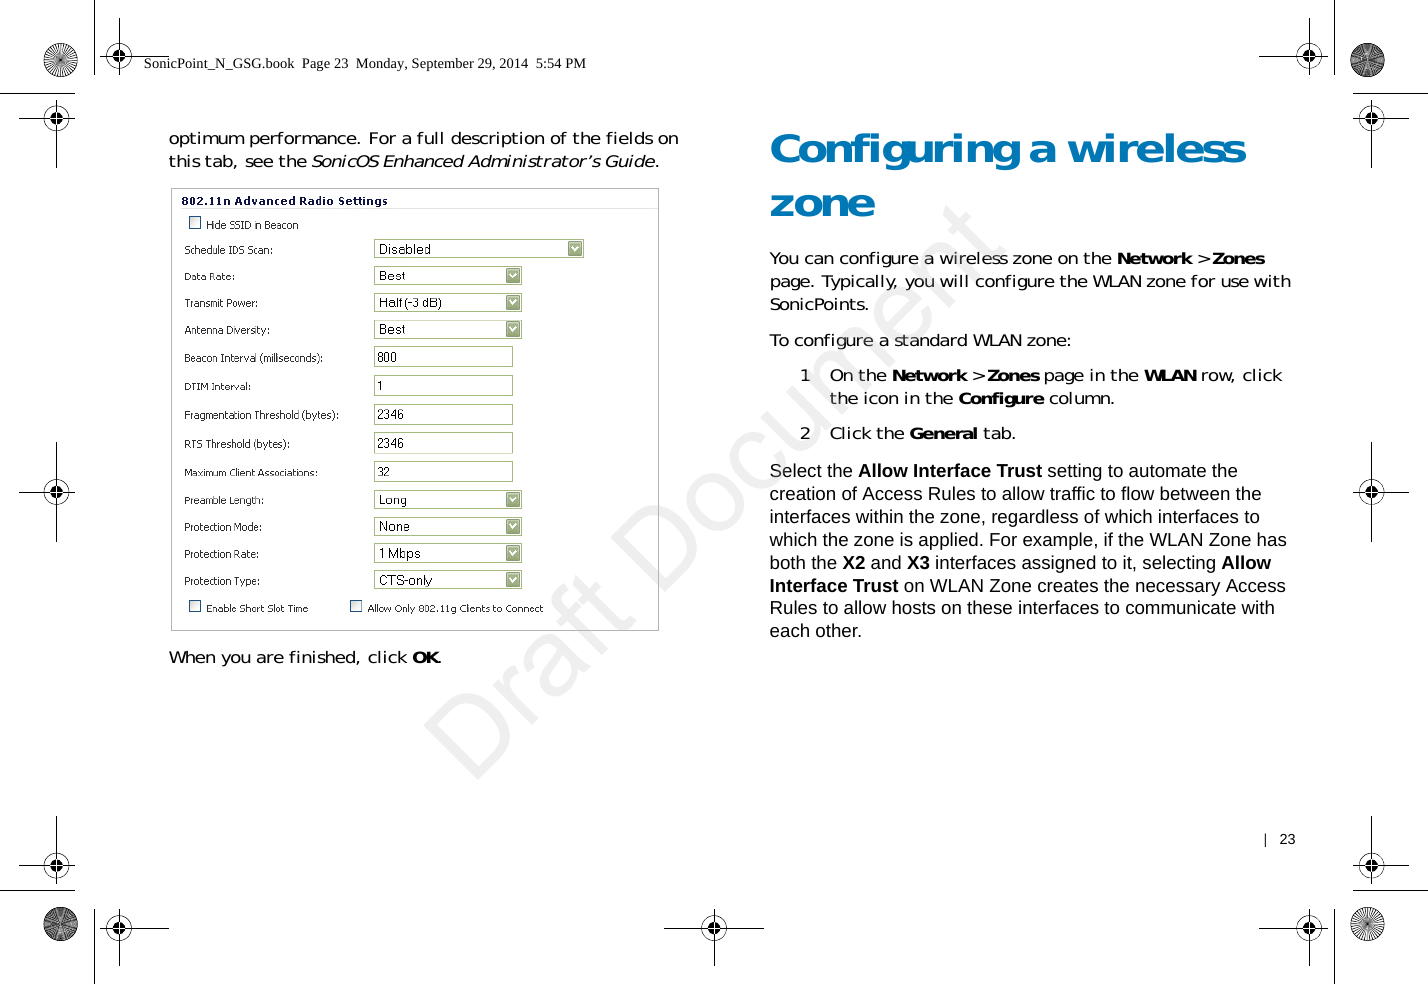    |   23optimum performance. For a full description of the fields on this tab, see the SonicOS Enhanced Administrator’s Guide.When you are finished, click OK.Configuring a wireless zone You can configure a wireless zone on the Network &gt; Zones page. Typically, you will configure the WLAN zone for use with SonicPoints. To configure a standard WLAN zone: 1On the Network &gt; Zones page in the WLAN row, click the icon in the Configure column.2Click the General tab.Select the Allow Interface Trust setting to automate the creation of Access Rules to allow traffic to flow between the interfaces within the zone, regardless of which interfaces to which the zone is applied. For example, if the WLAN Zone has both the X2 and X3 interfaces assigned to it, selecting Allow Interface Trust on WLAN Zone creates the necessary Access Rules to allow hosts on these interfaces to communicate with each other.SonicPoint_N_GSG.book  Page 23  Monday, September 29, 2014  5:54 PMDraft Document